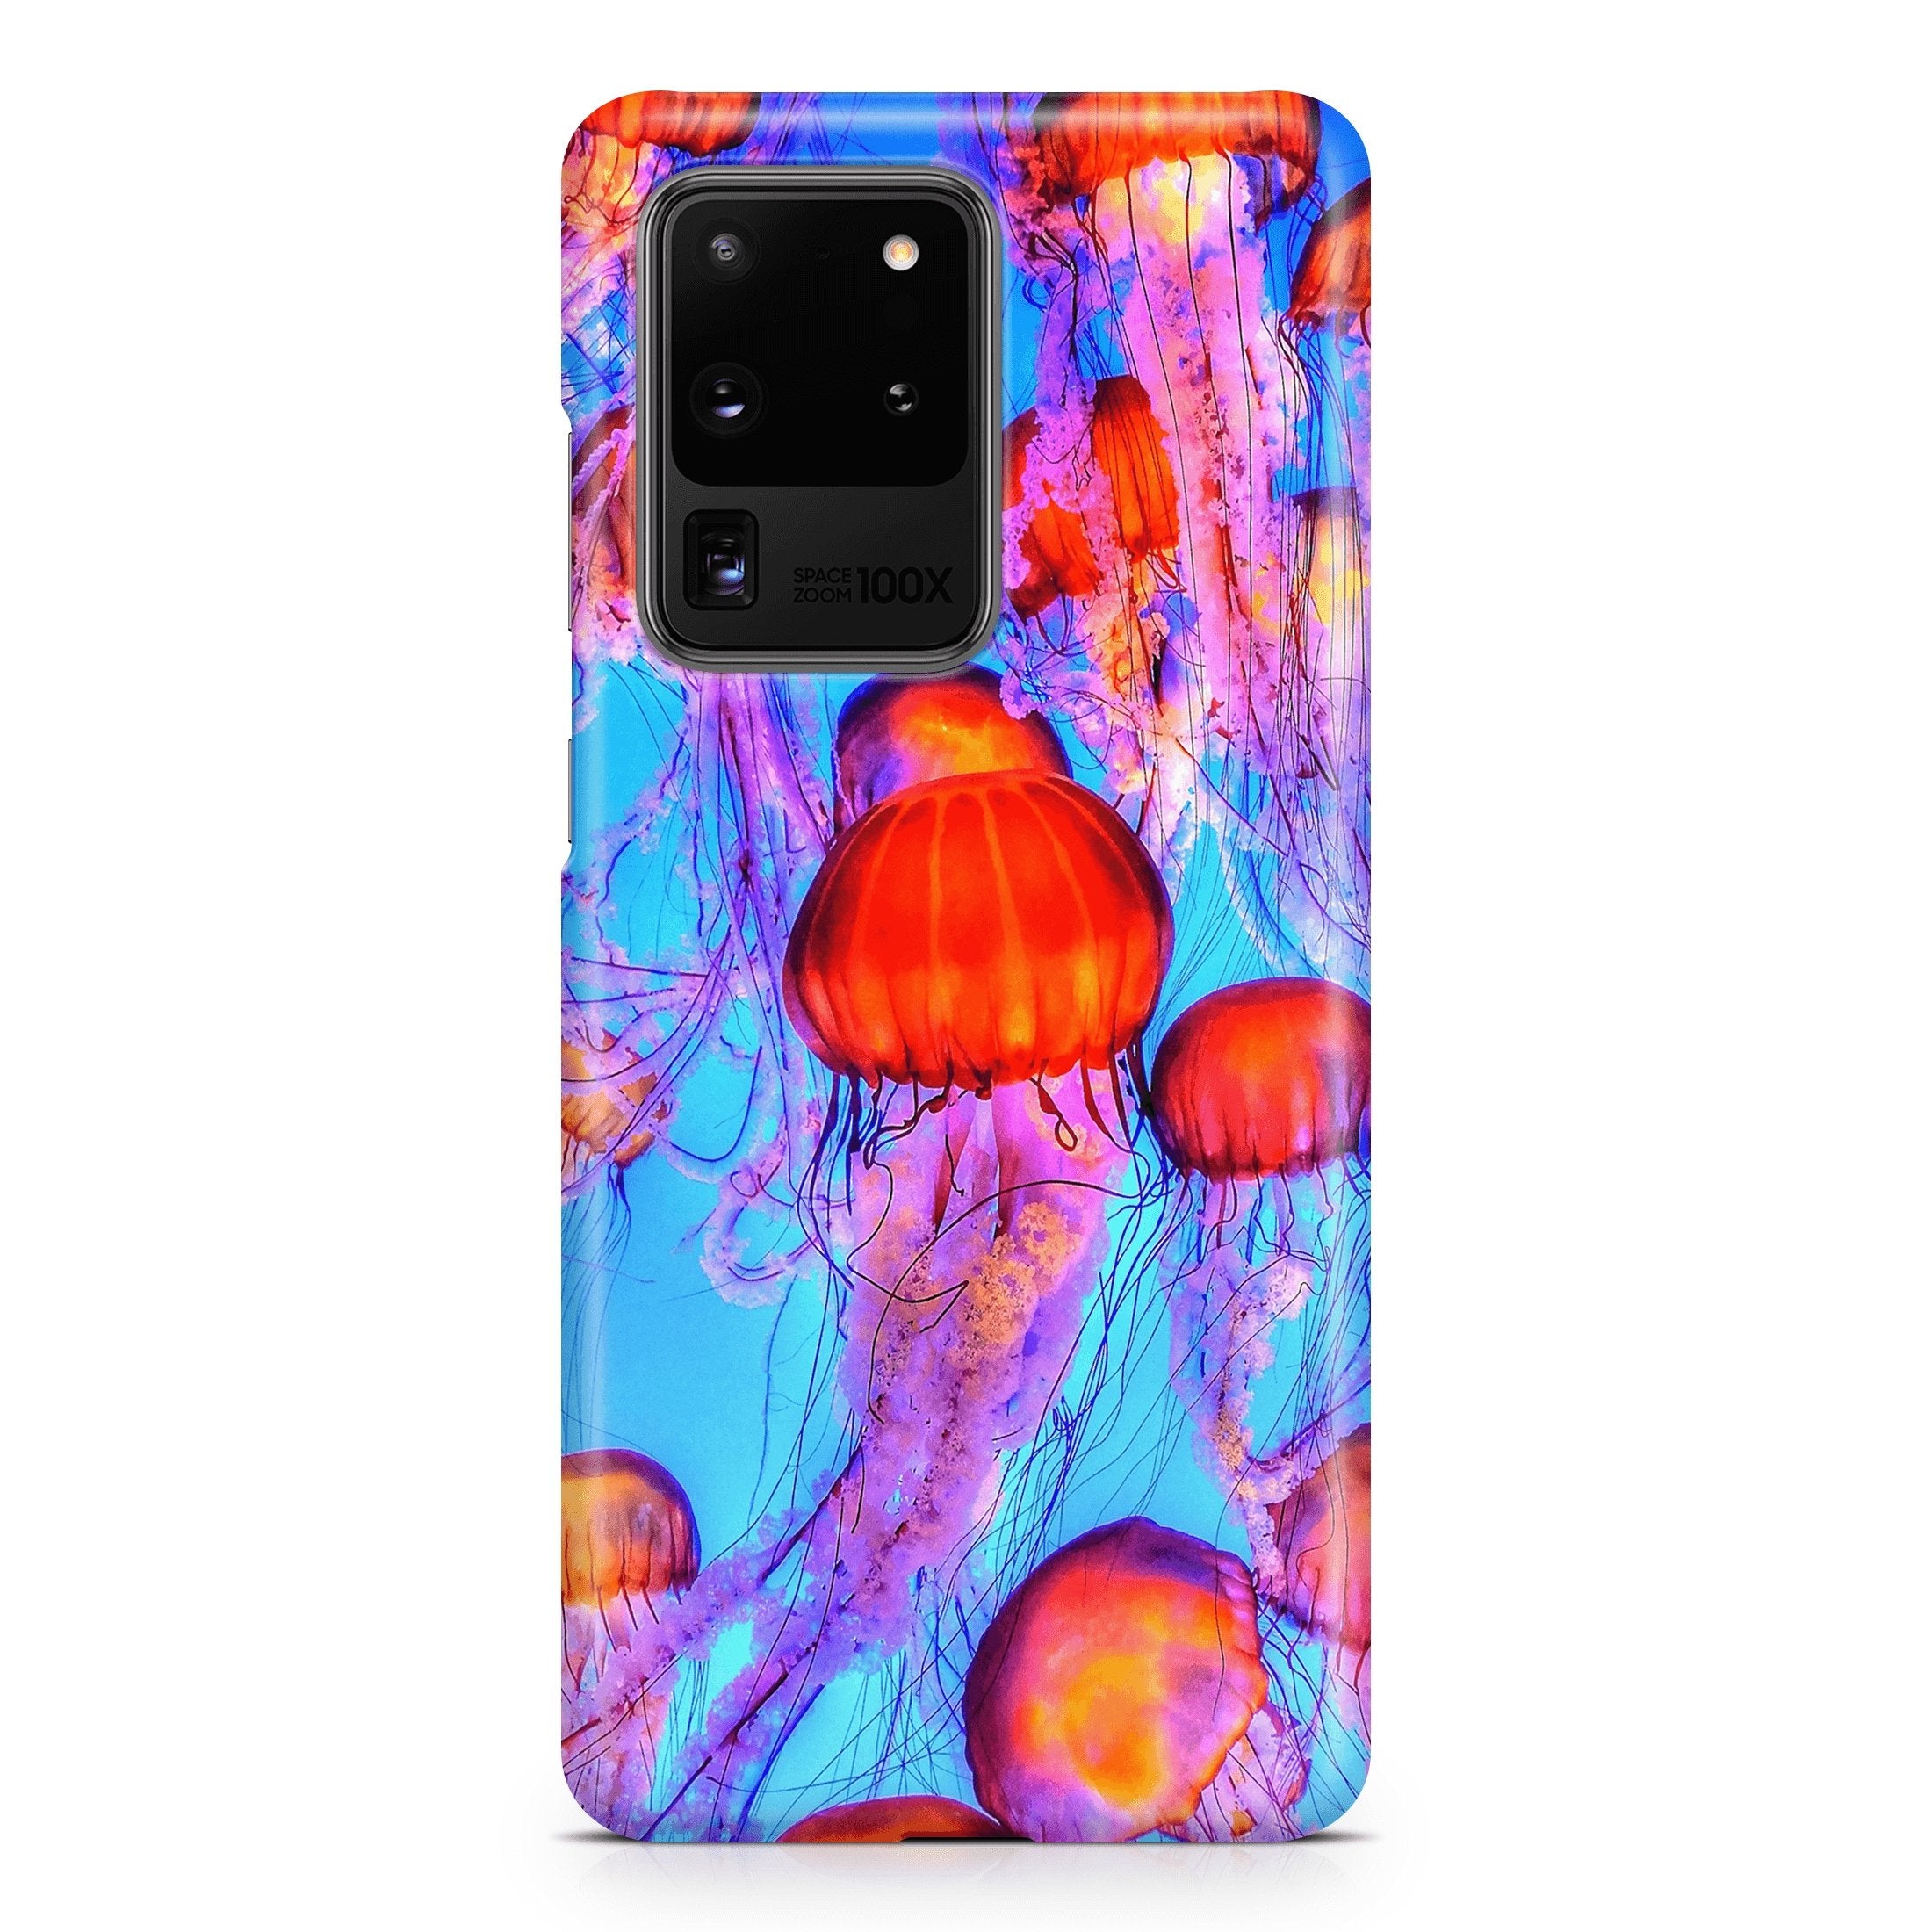 Jellyfish - Samsung phone case designs by CaseSwagger